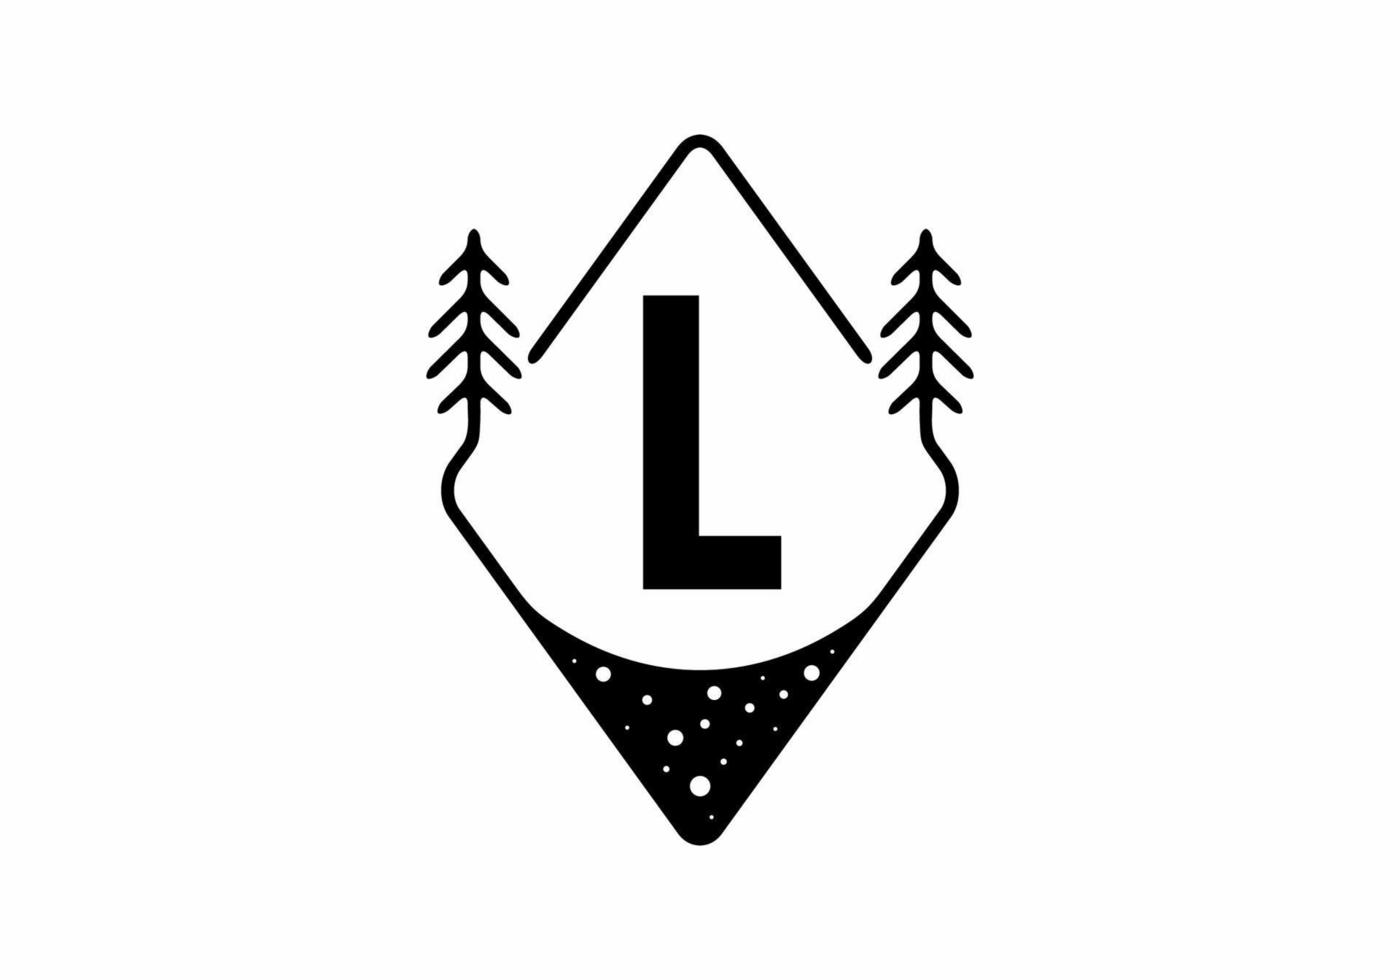 Black line art badge with pine trees and L letter vector